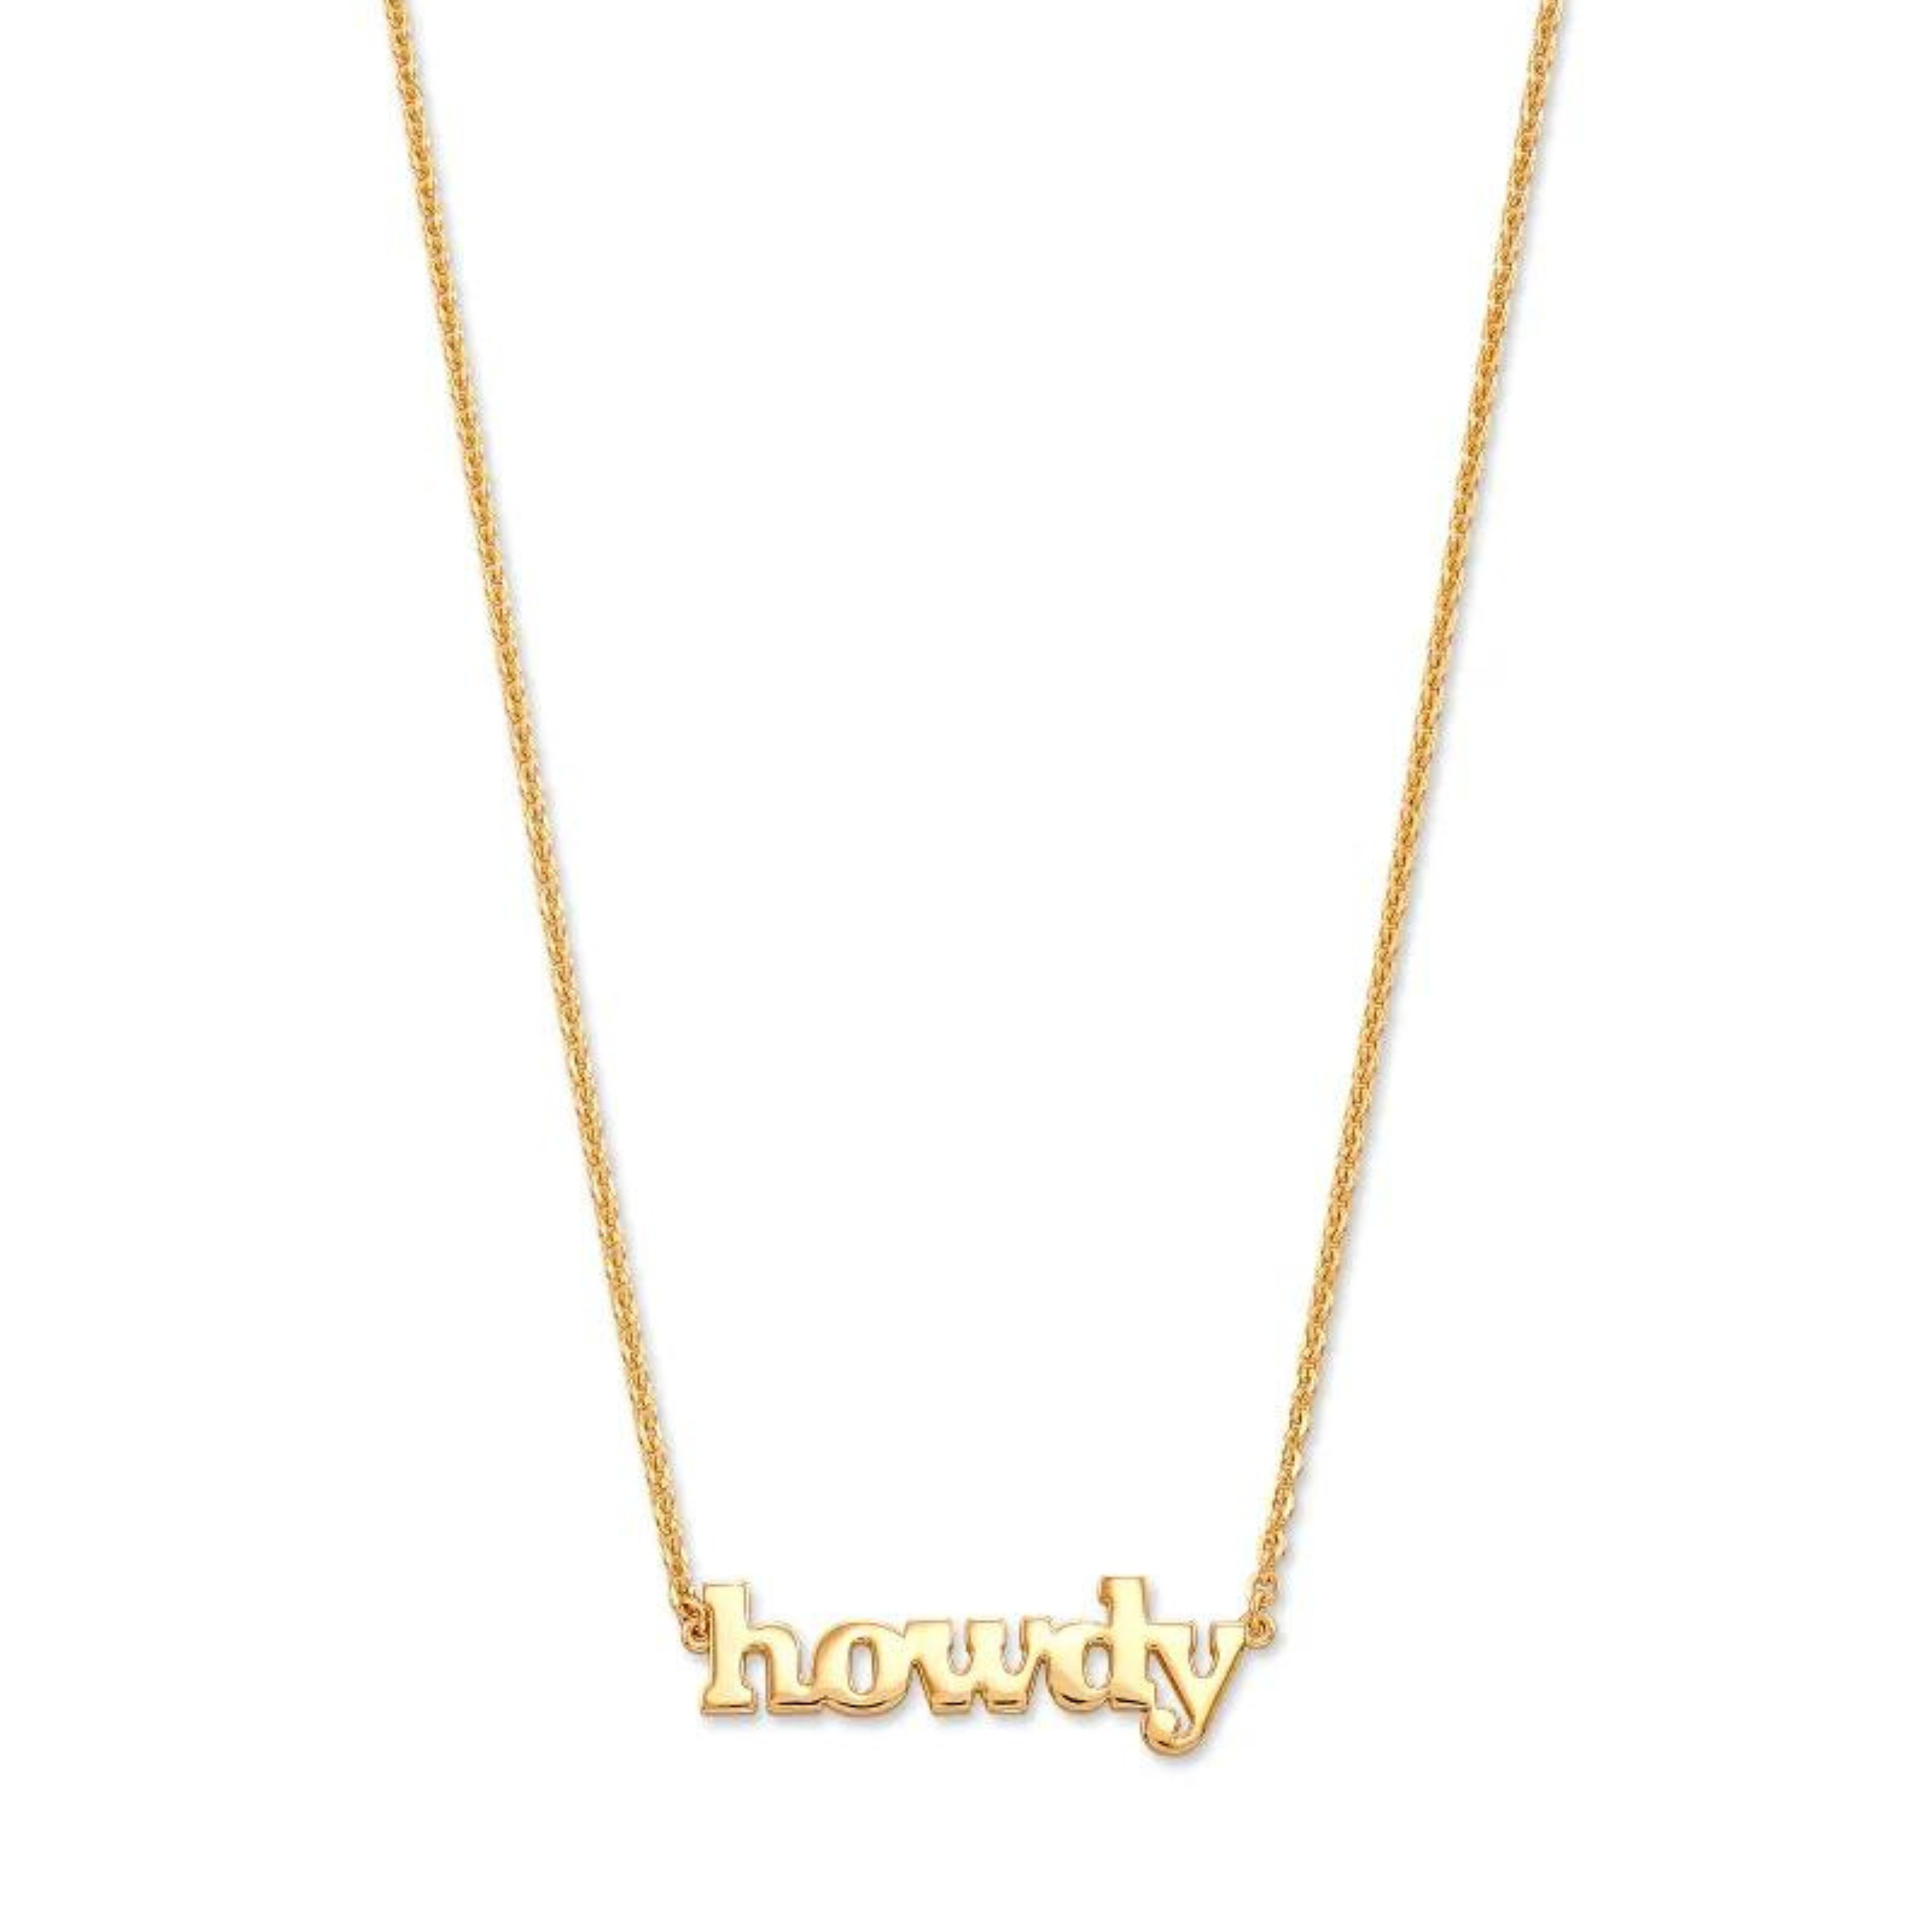 Gold chain necklace with gold "HOWDY" pendant pictured on a white background. 